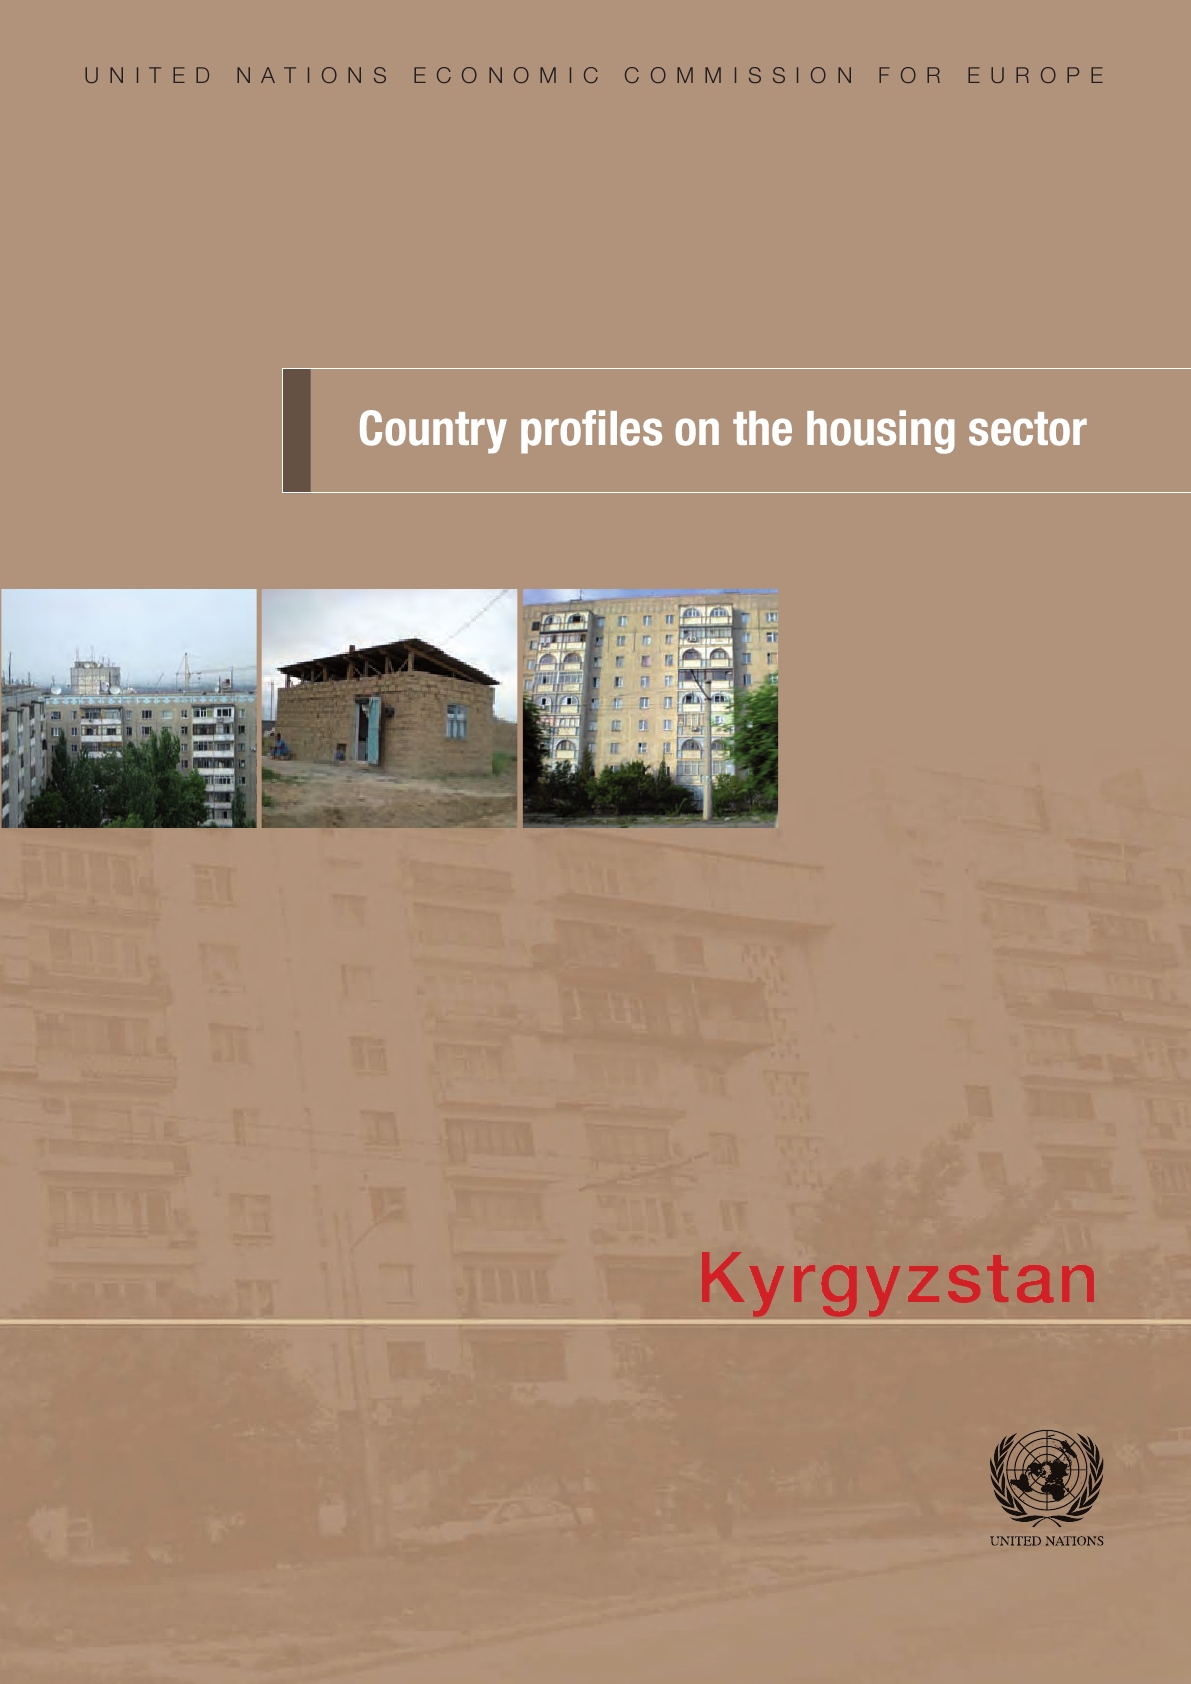 UNECE: Country Profiles on the Housing Sector: Kyrgyzstan